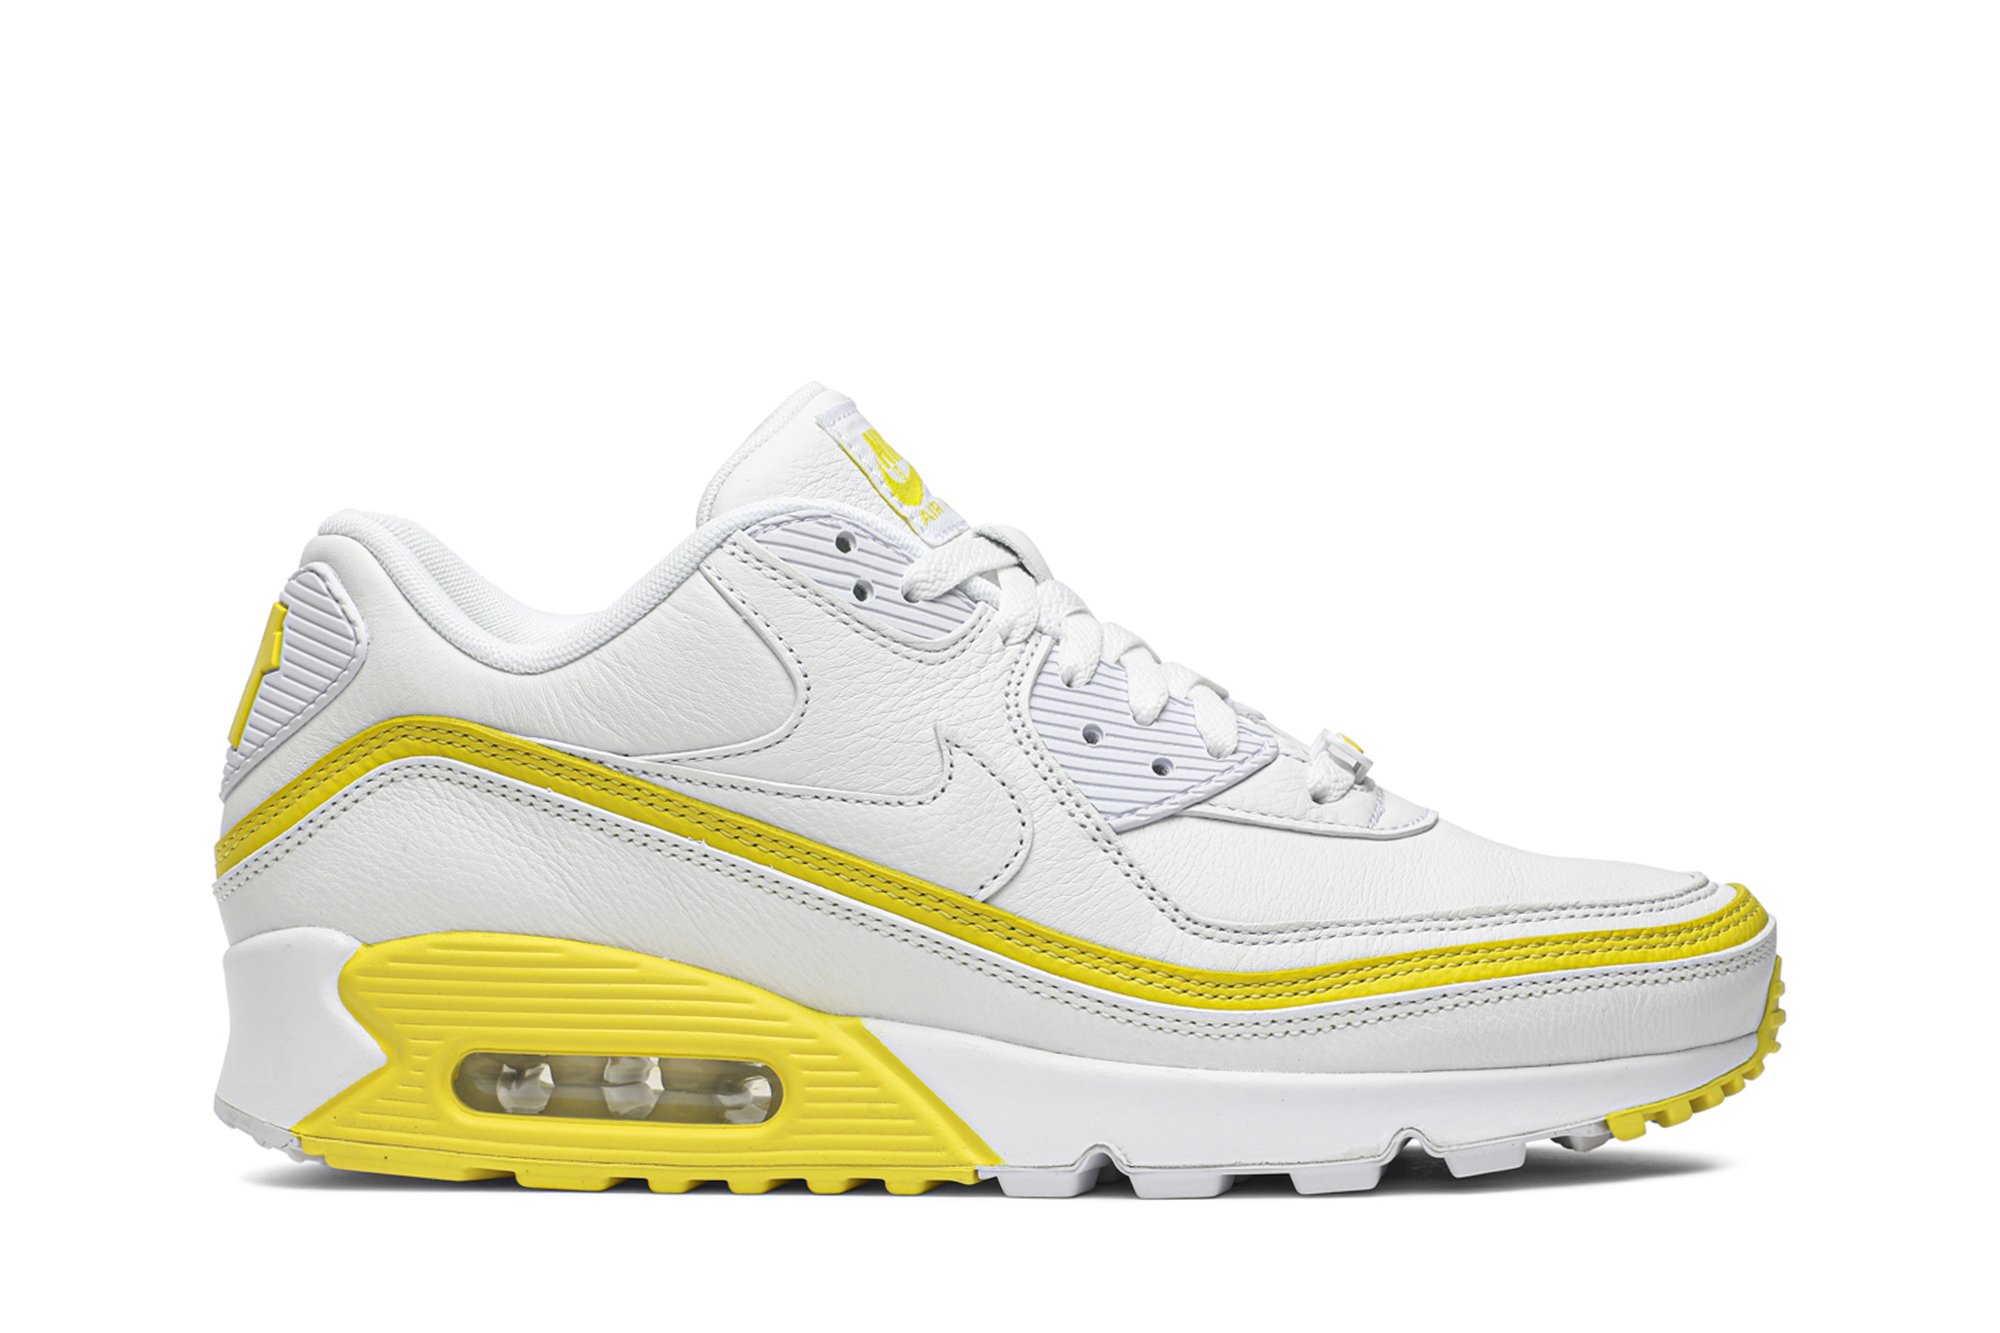 Undefeated x Air Max 90 'White Optic Yellow' | GOAT